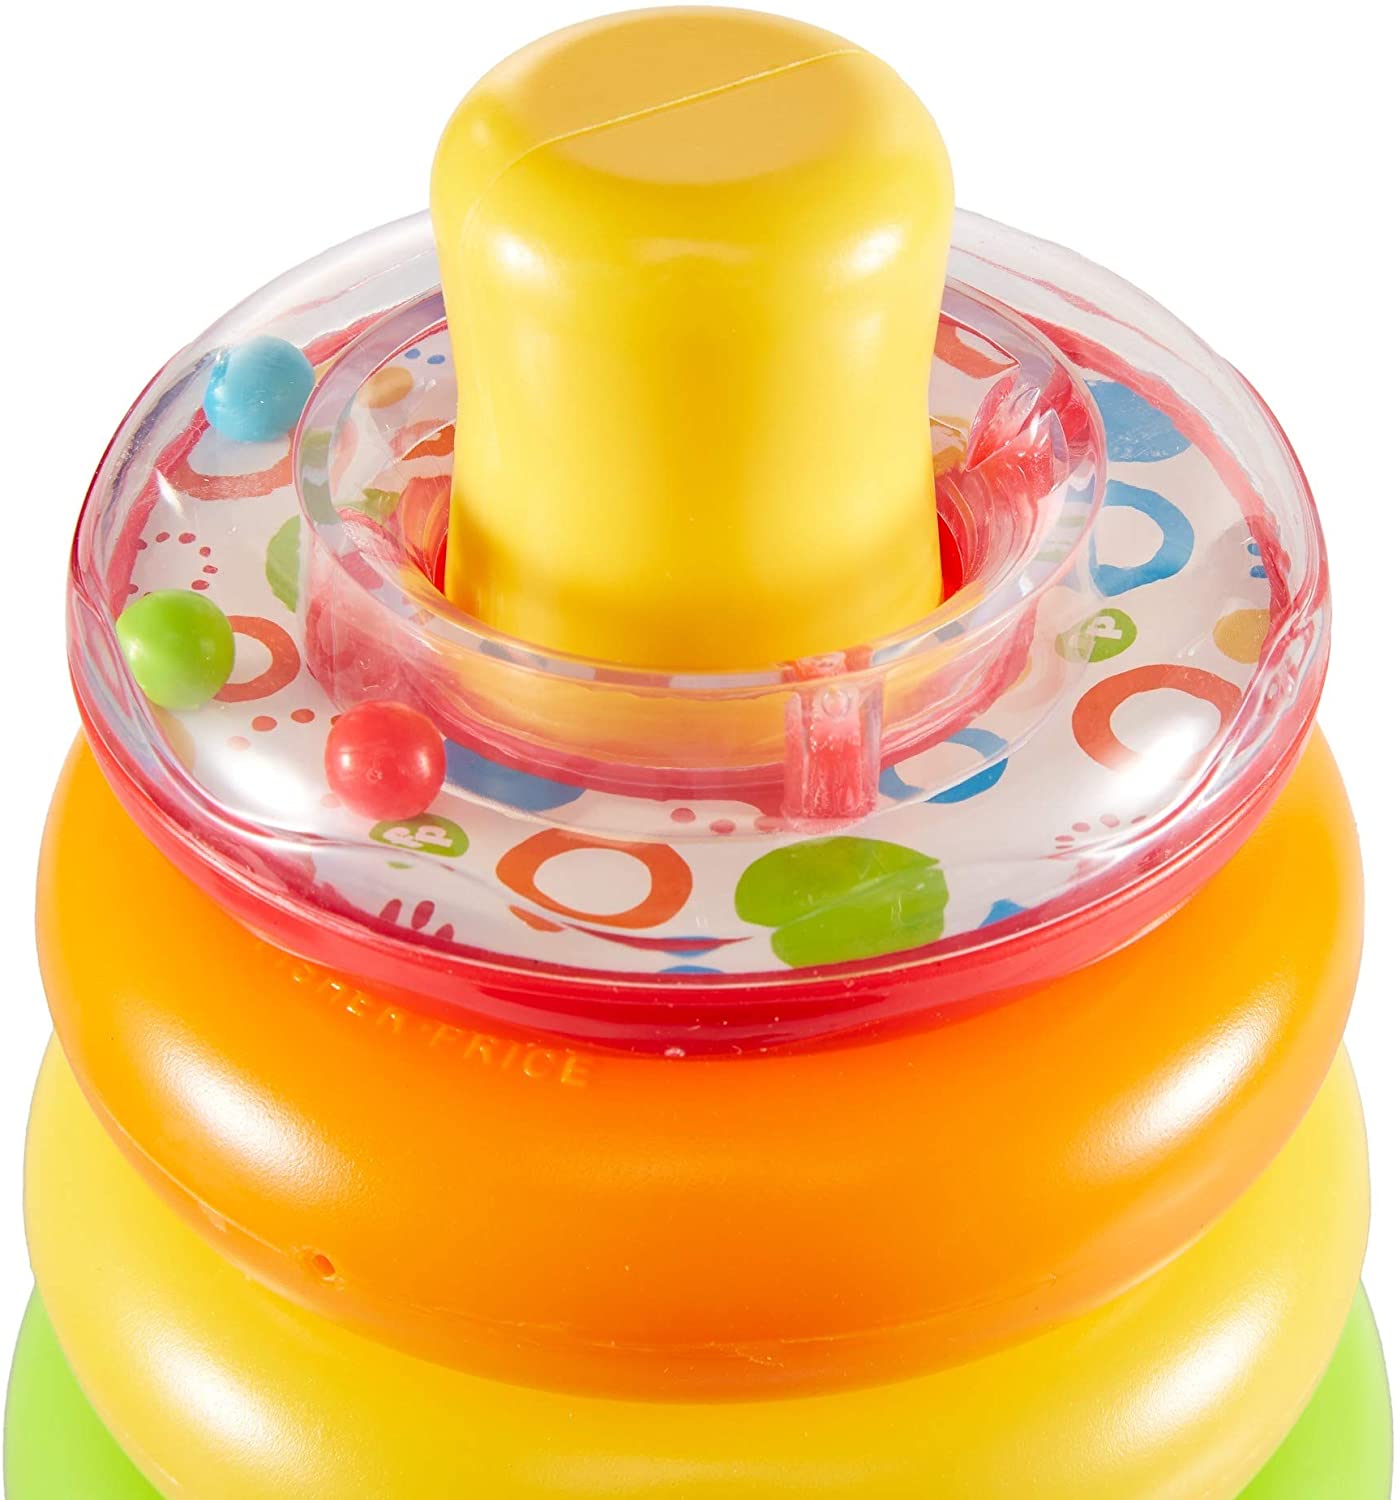 Fisher-Price Rock-a-Stack Classic stacking toy with 5 colorful rings to grasp, shake, and stack (Plastic Materials)